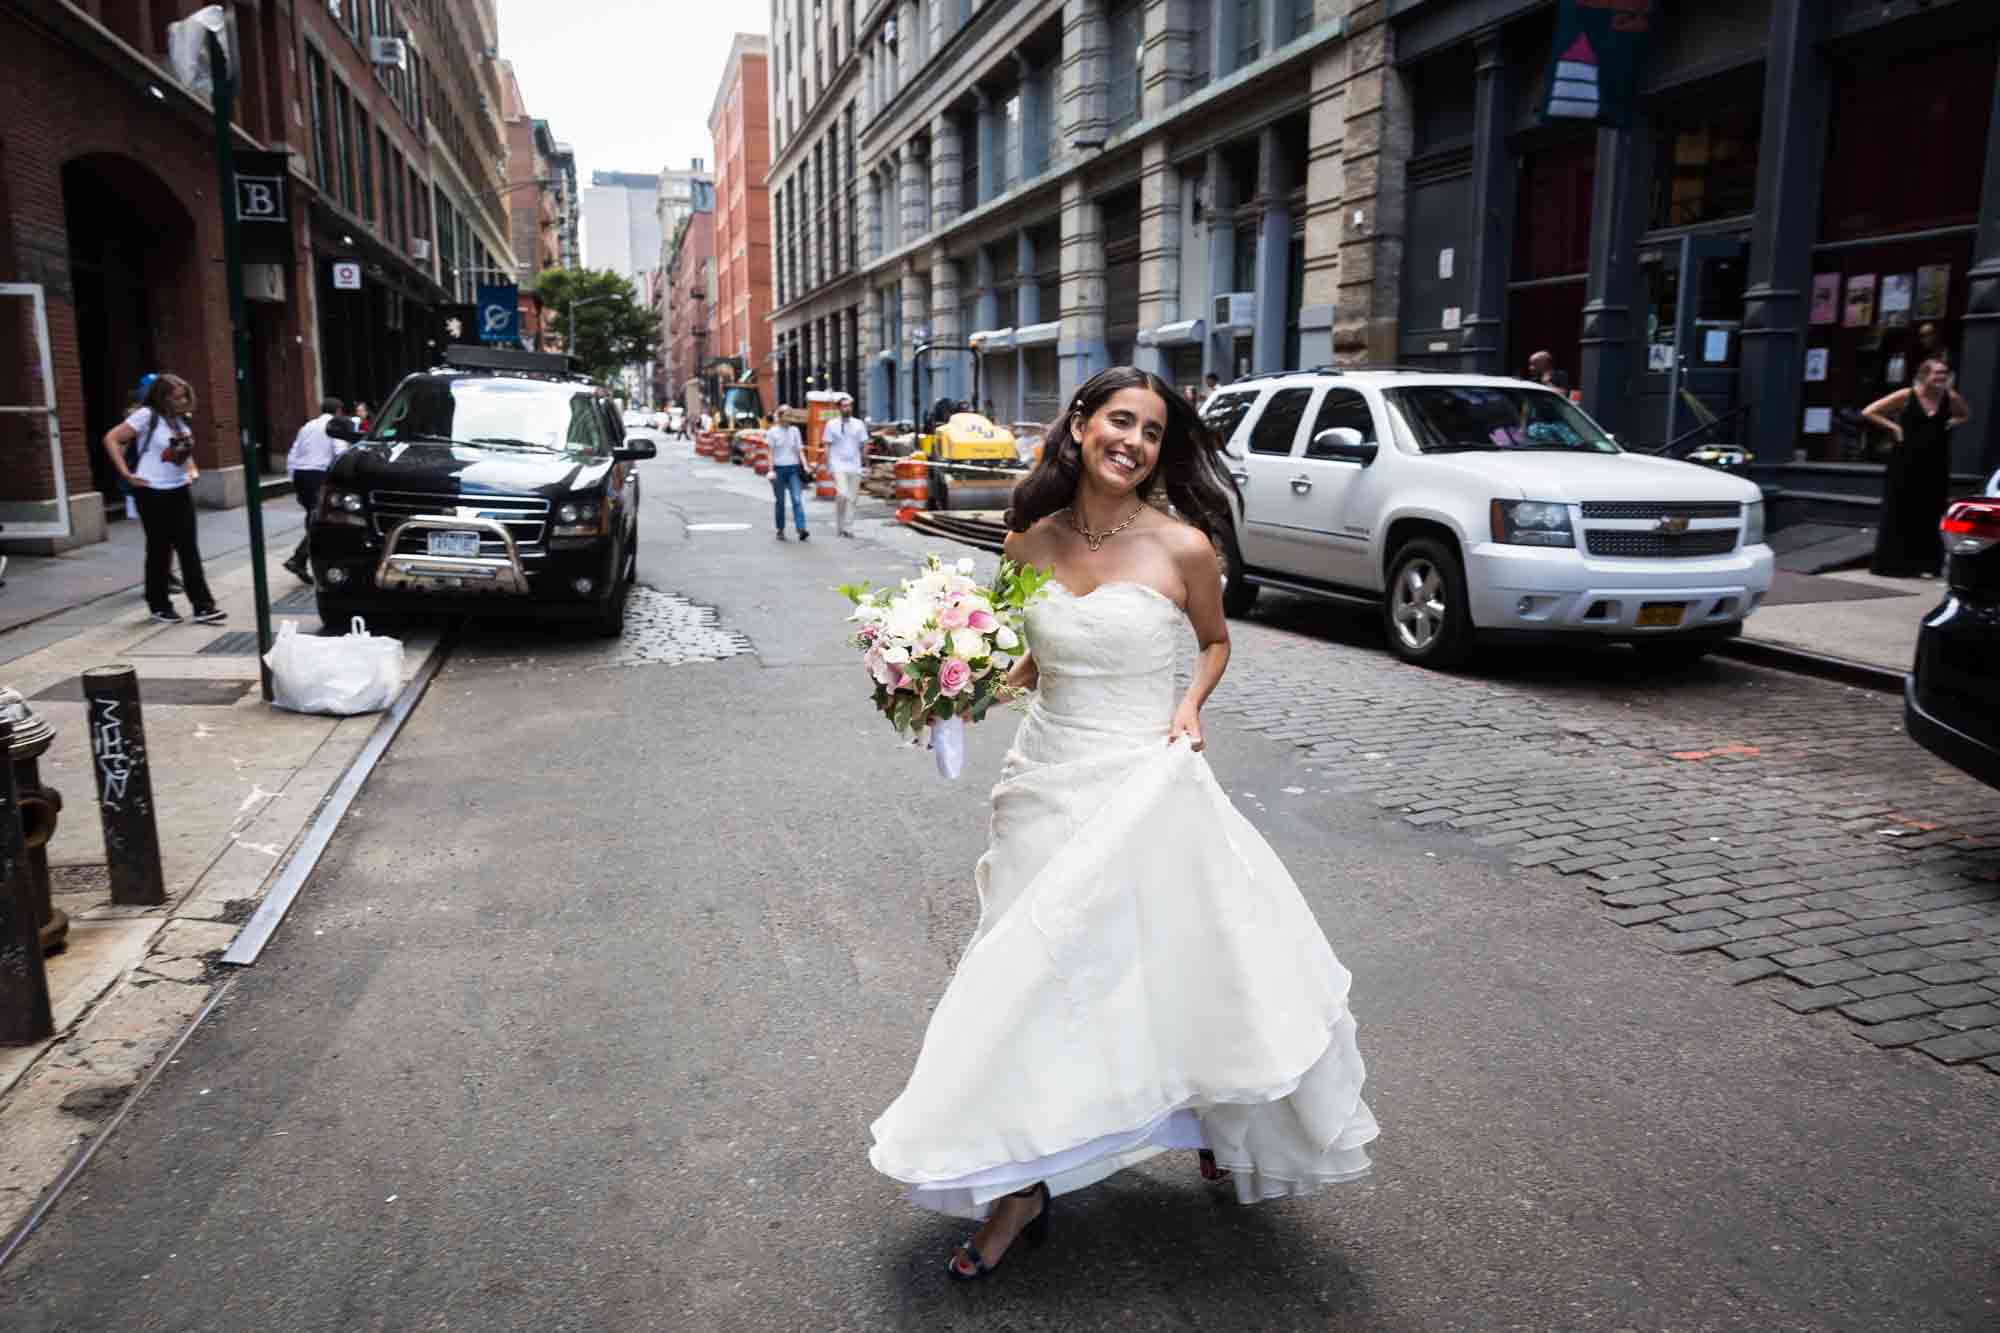 Bride holding bouquet and walking in NYC street